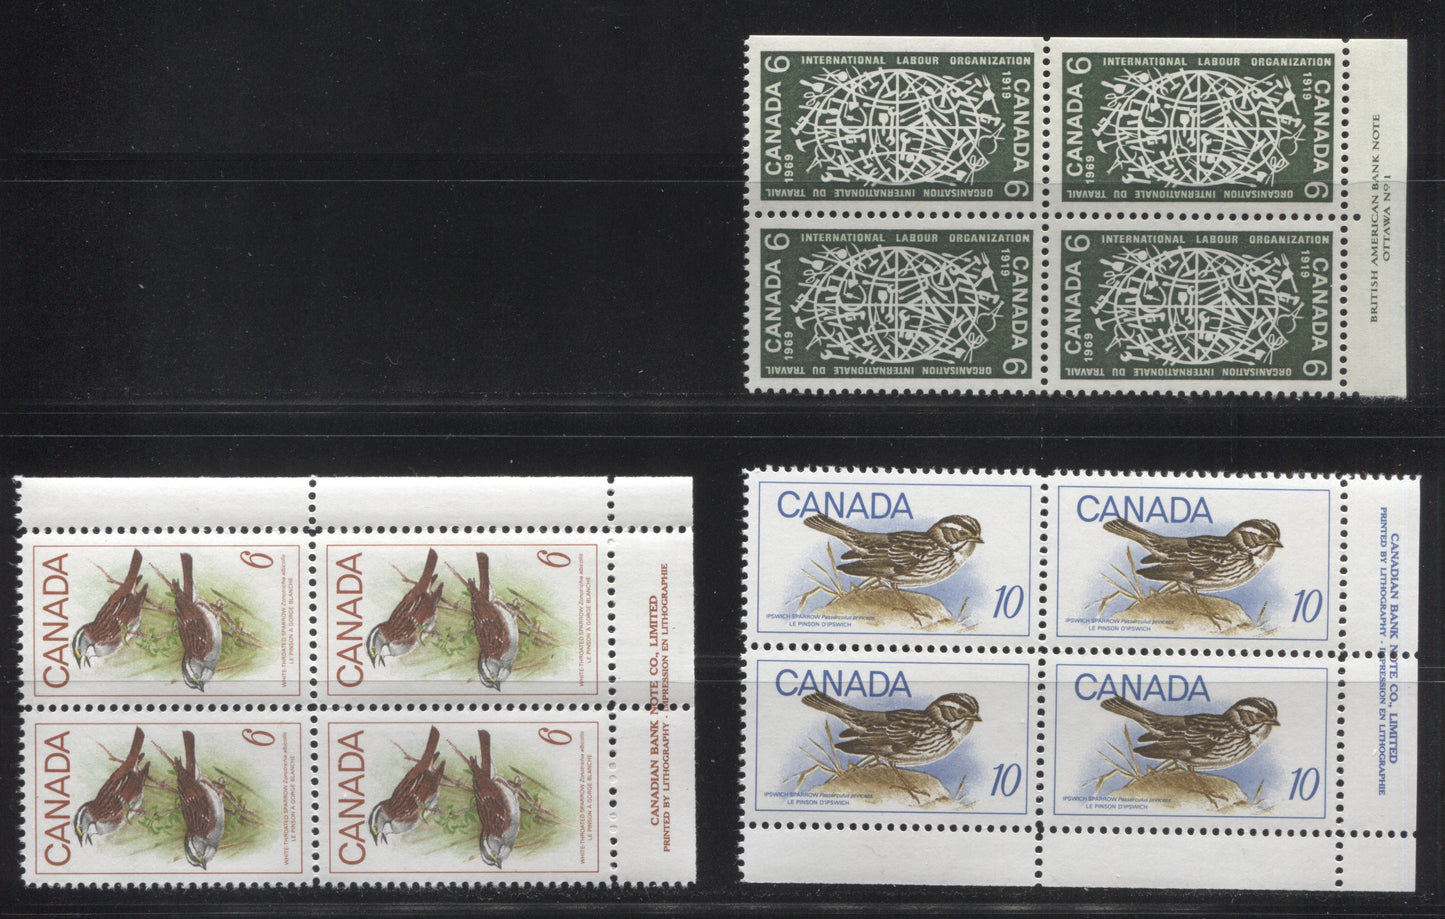 Lot 96 Canada #493, 496-497 6c & 10c Dark Olive Green - Ultramarine & Multicolored Globe & Tools - Ipswich Sparrow, 1969 Commemoratives, 3 VFNH LR Plate 1 Blocks Of 4 On Dull Fluorescent and HB Papers